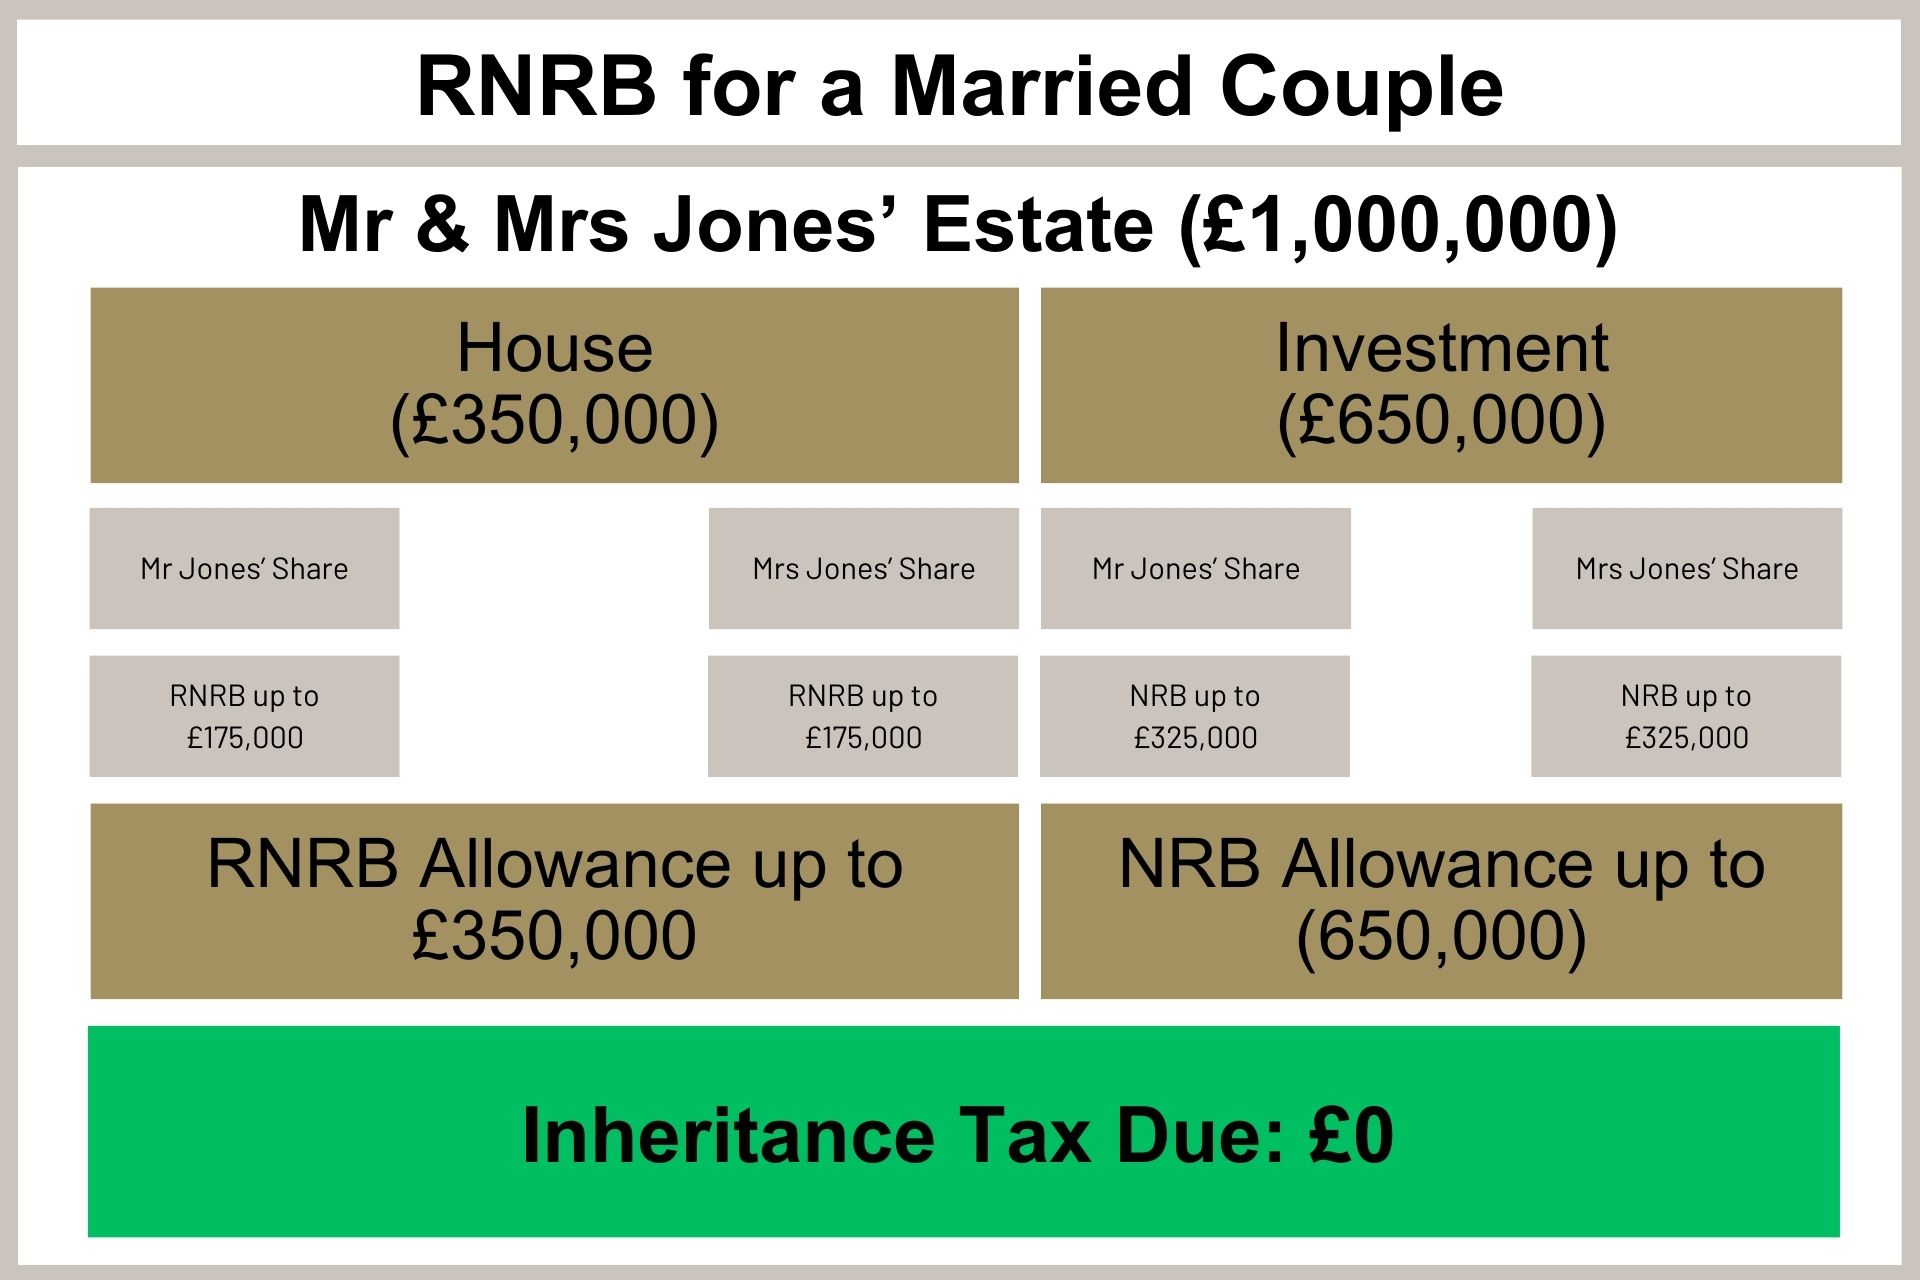 RNRB for a Married Couple in the UK